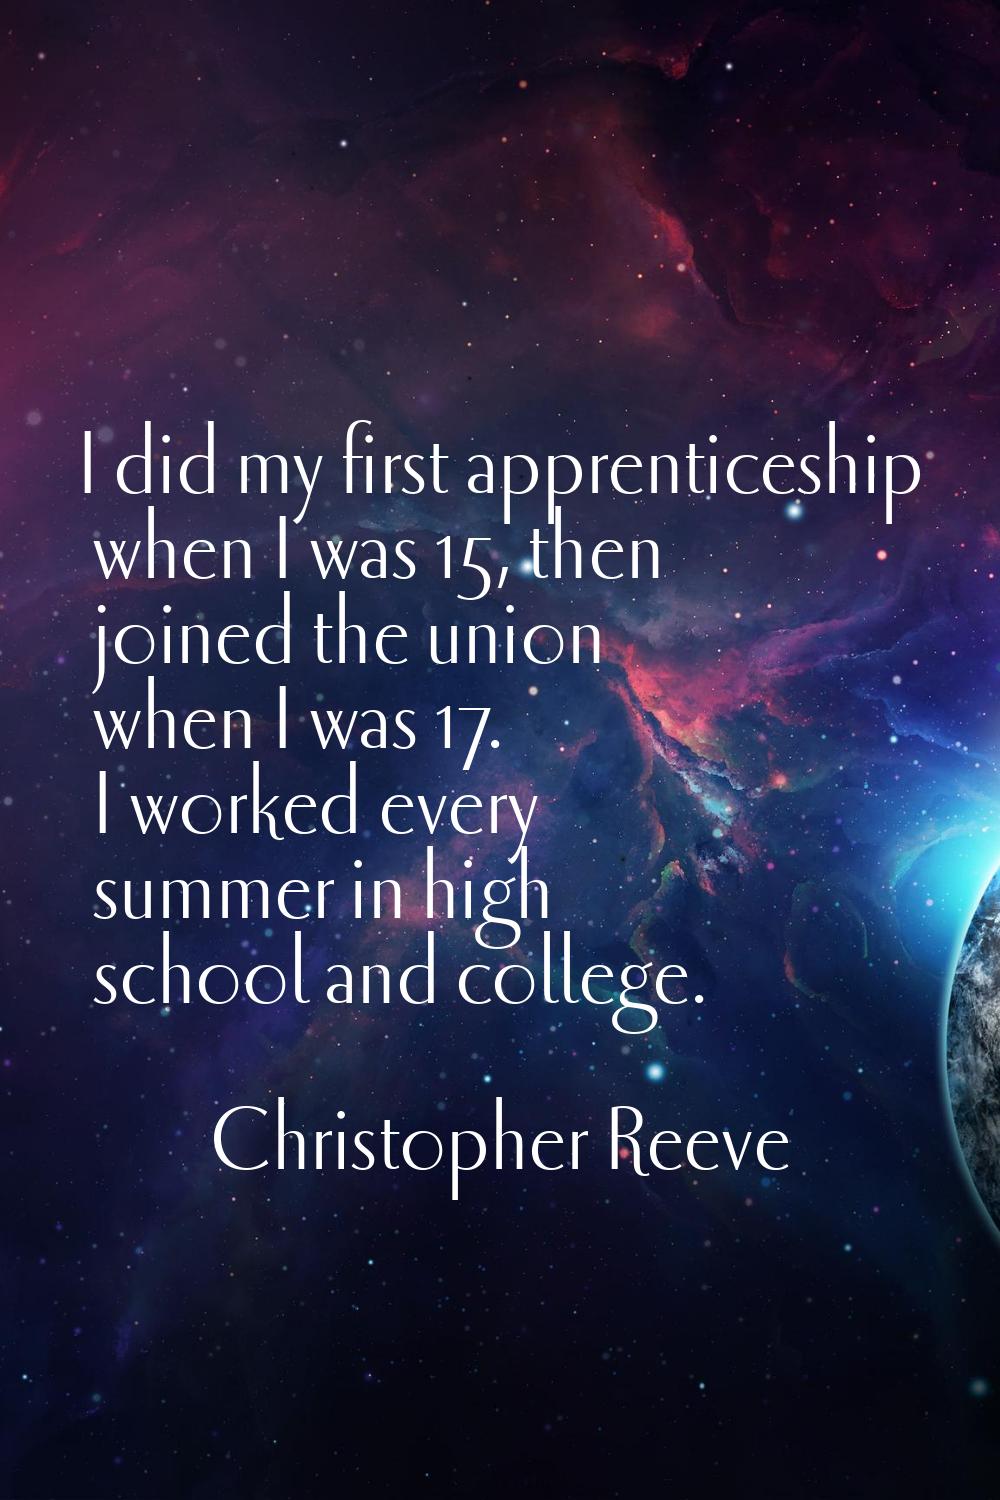 I did my first apprenticeship when I was 15, then joined the union when I was 17. I worked every su